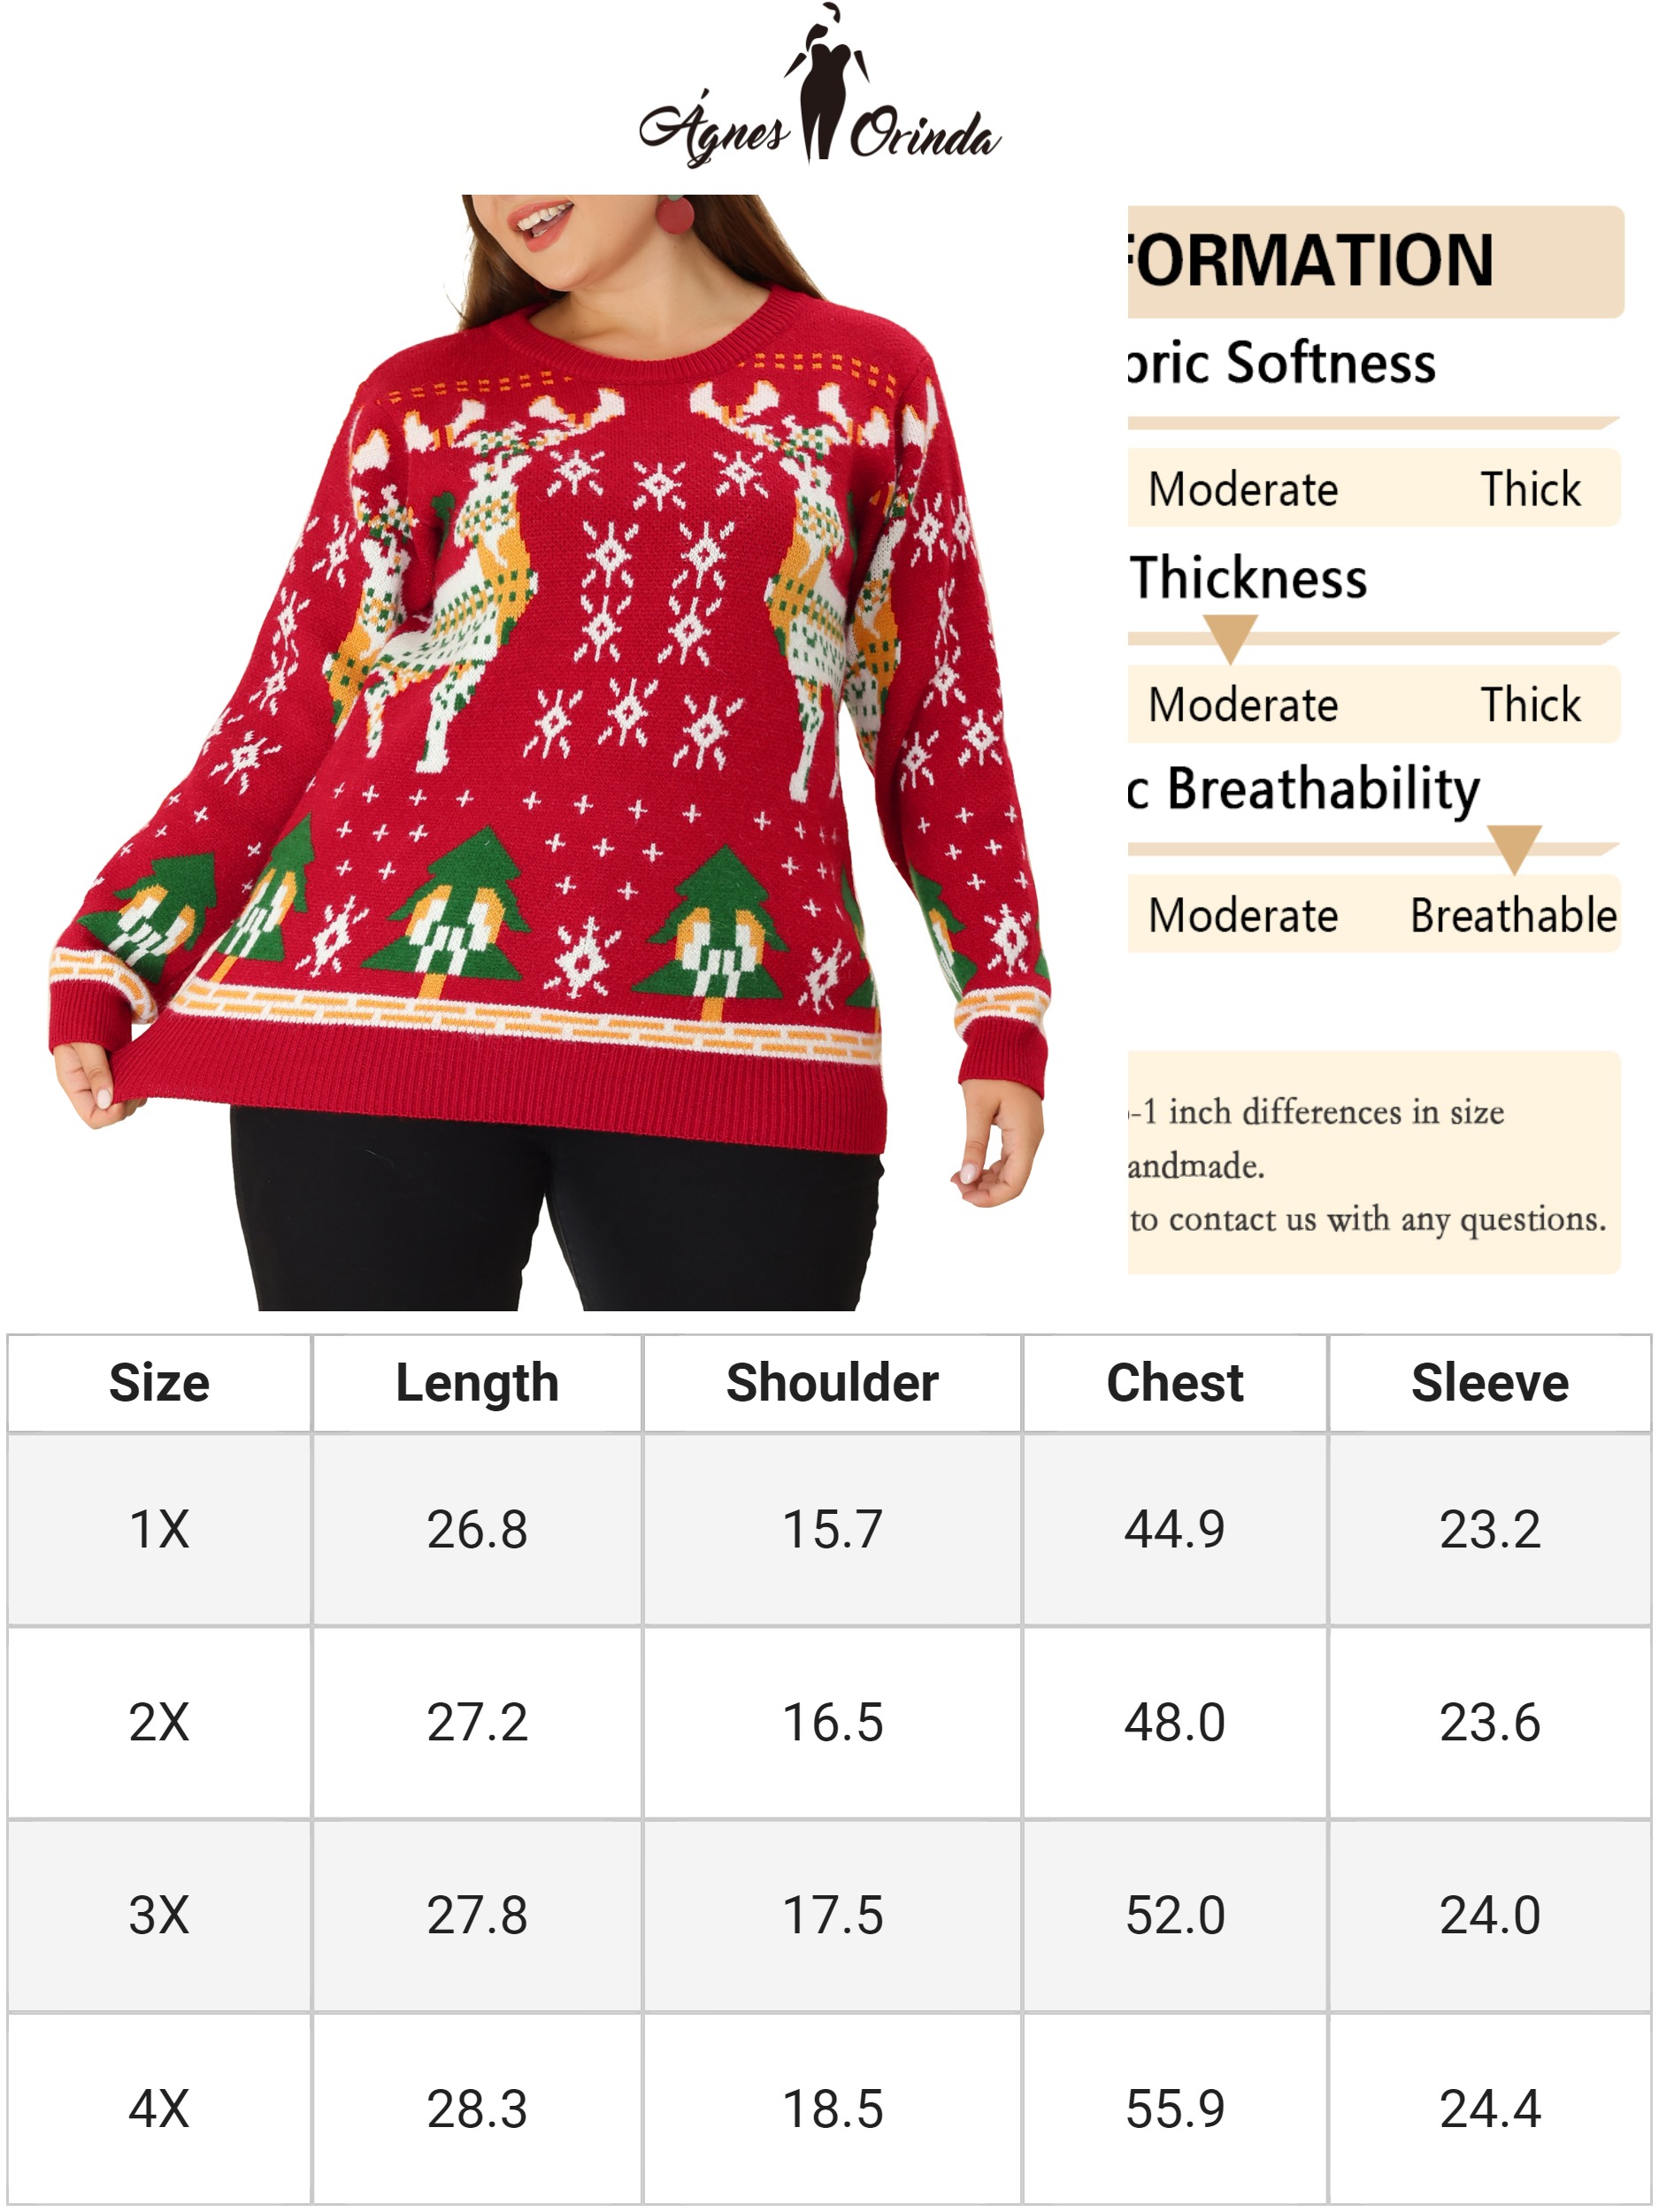 Unique Bargains Agnes Orinda Women's Plus Size Sweater Casual Knit Pullover Long Sleeve Sweaters